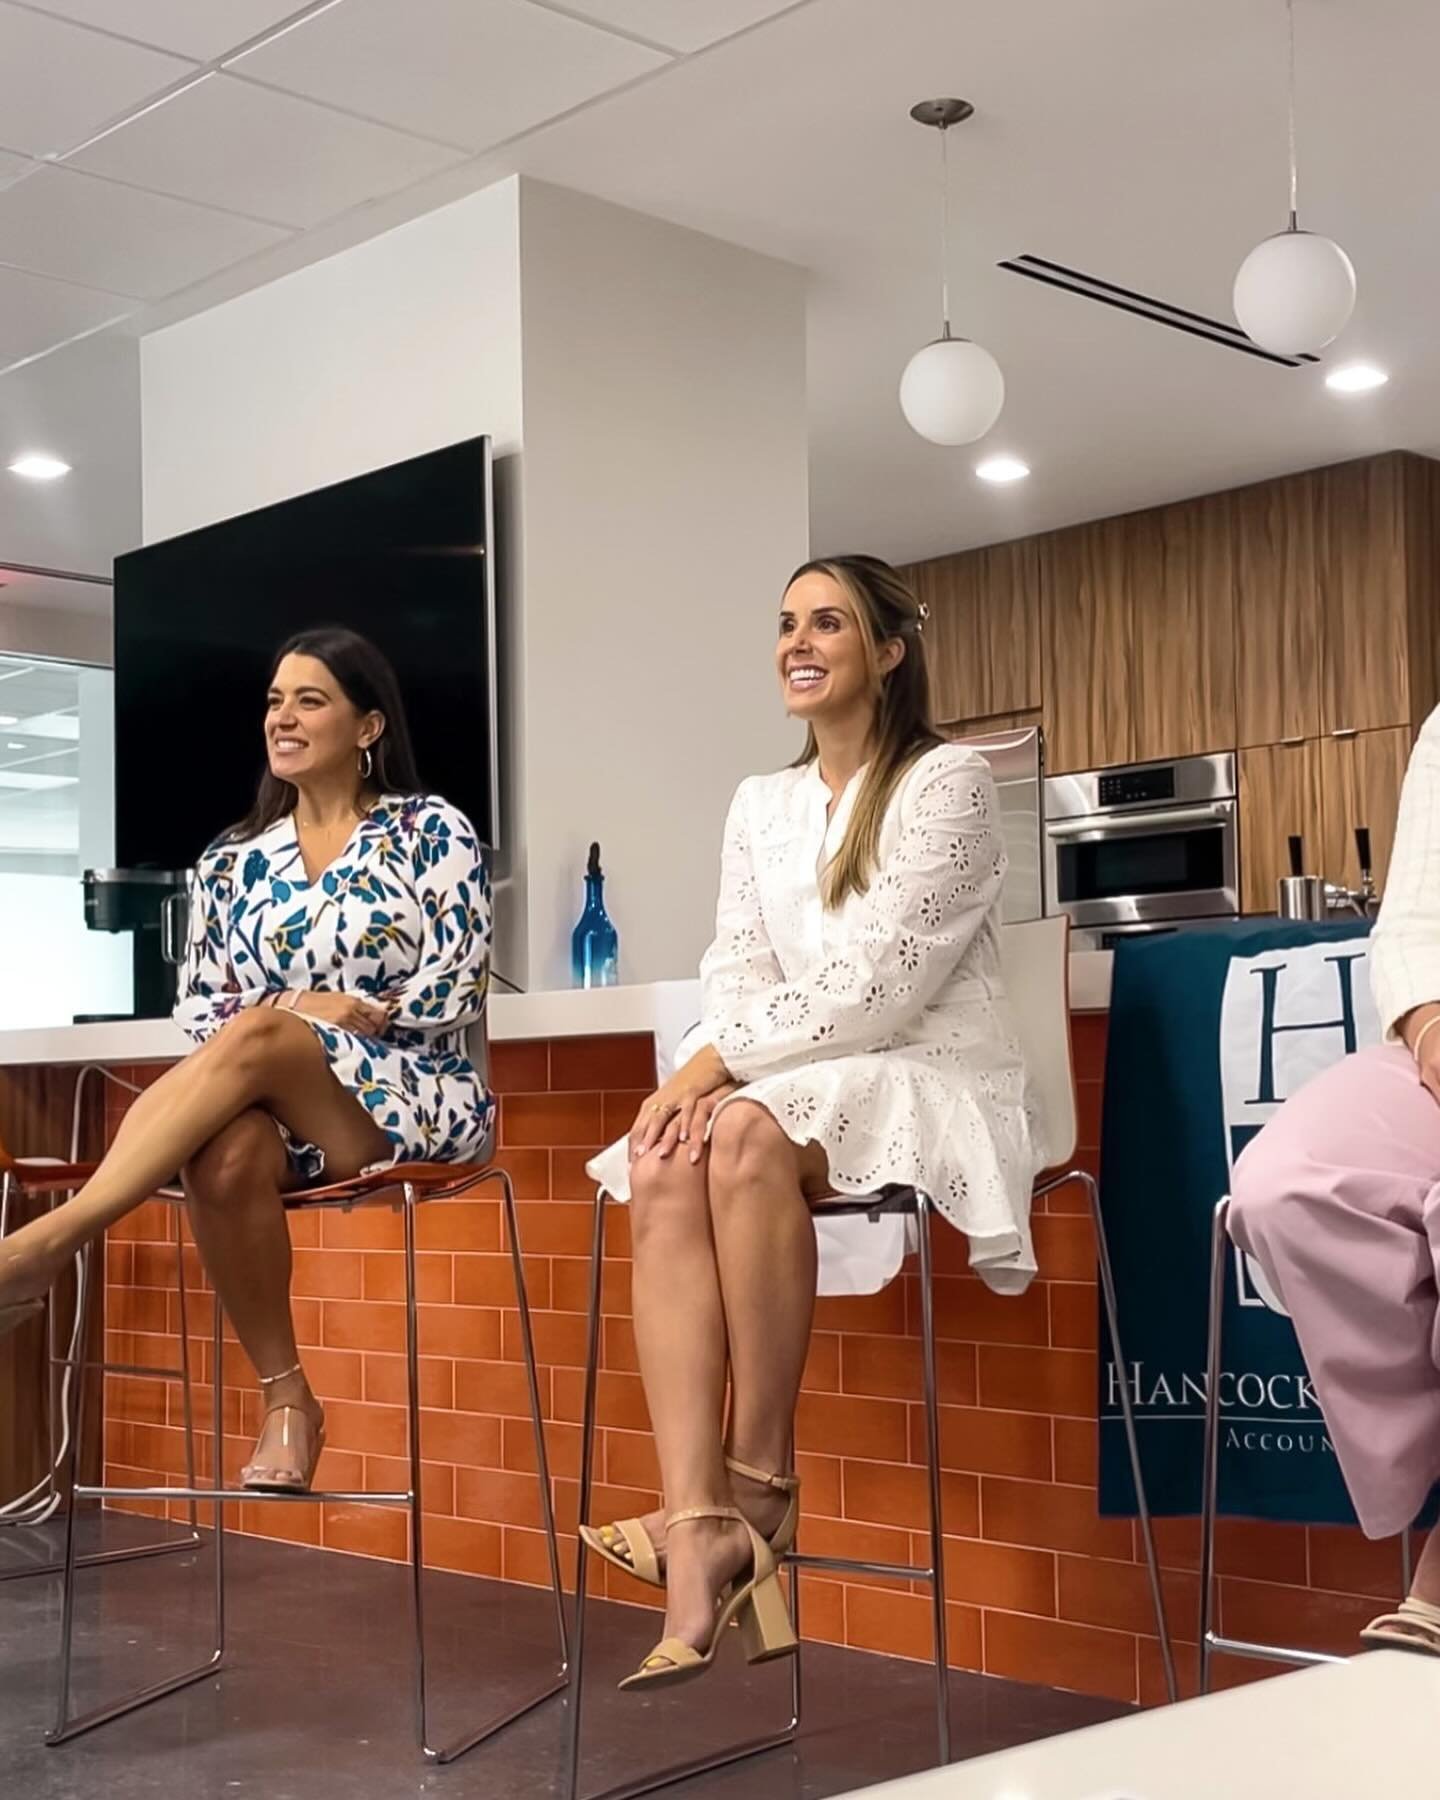 Fear of public speaking? 😱 New milestone in my career unlocked 🔓 

Earlier this week, I had the pleasure of speaking about social media in real estate at the Master the Market event hosted by South Tampa Luxury Group. Thank you to @southtampaluxury